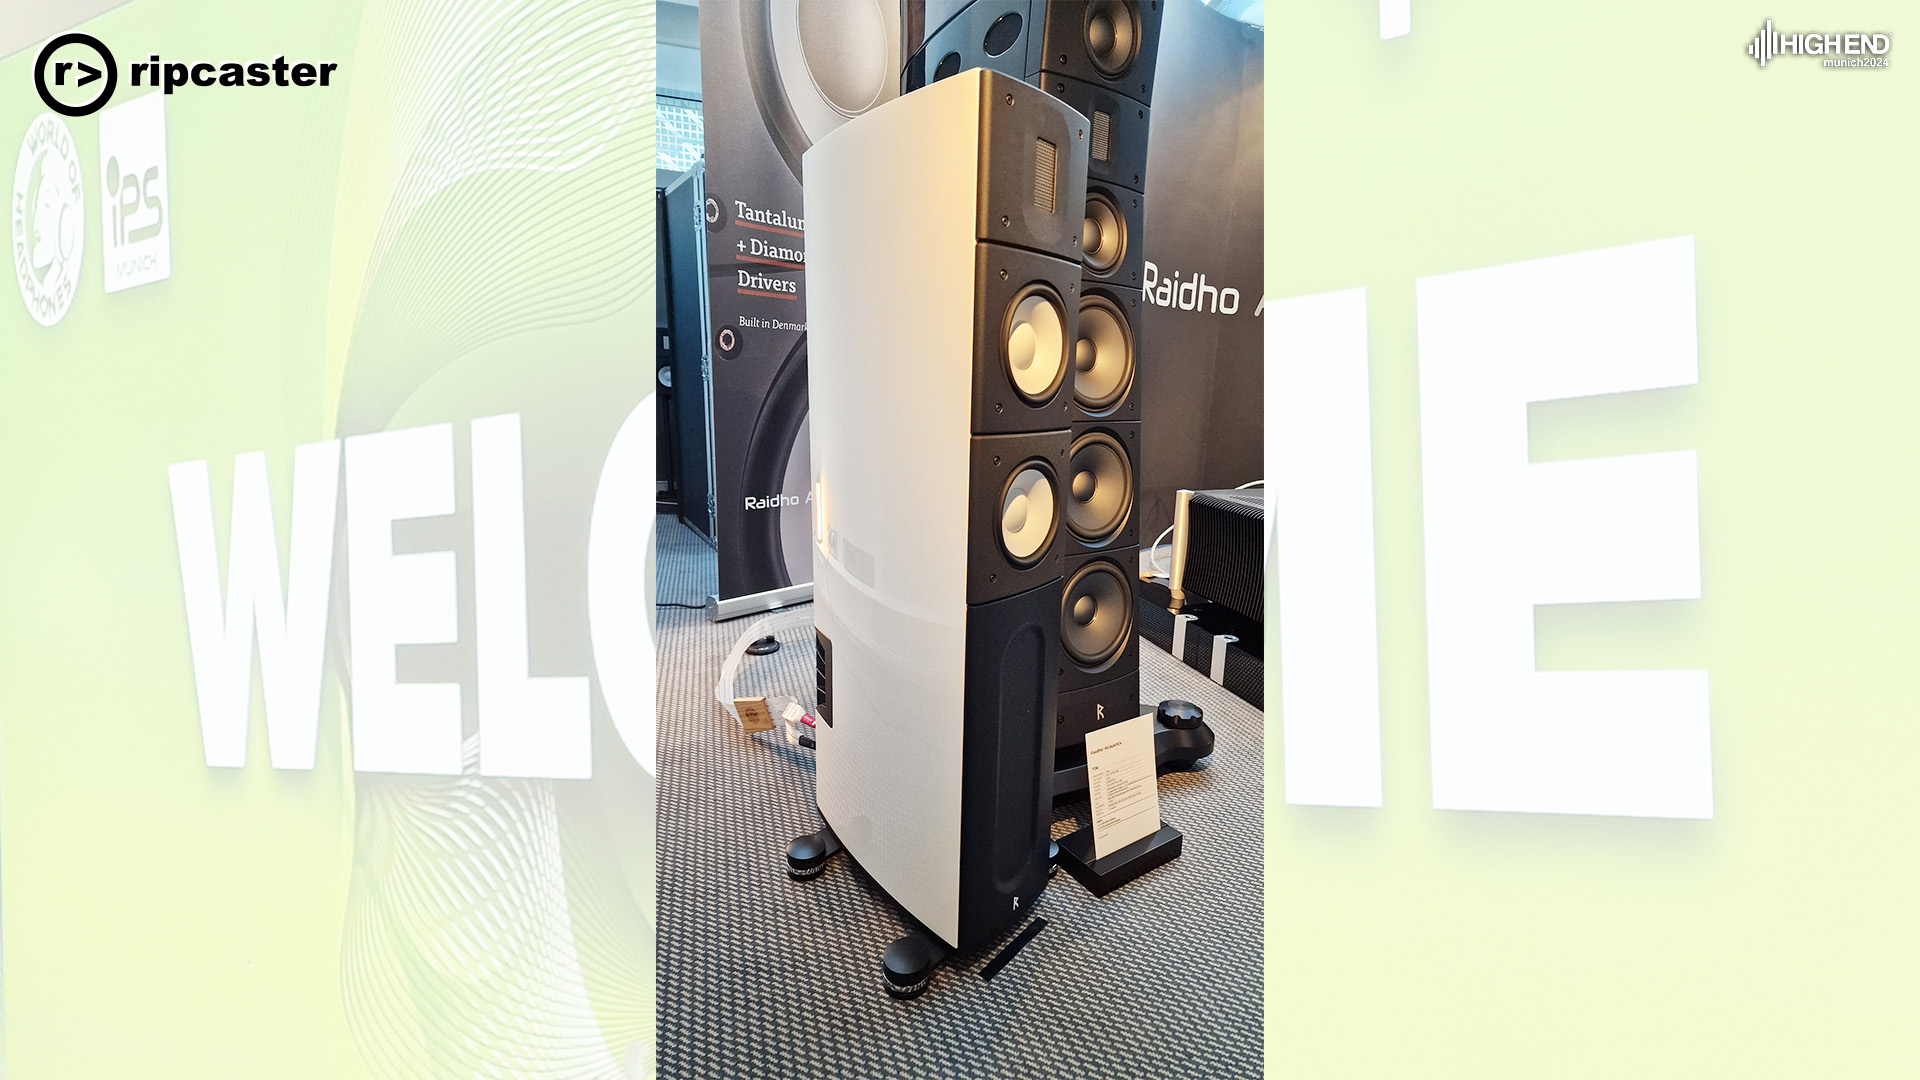 This is the new Raidho X2.6 speaker in white beside a much larger speaker on its right.  Both are floorstanding.  There are signs in the background.